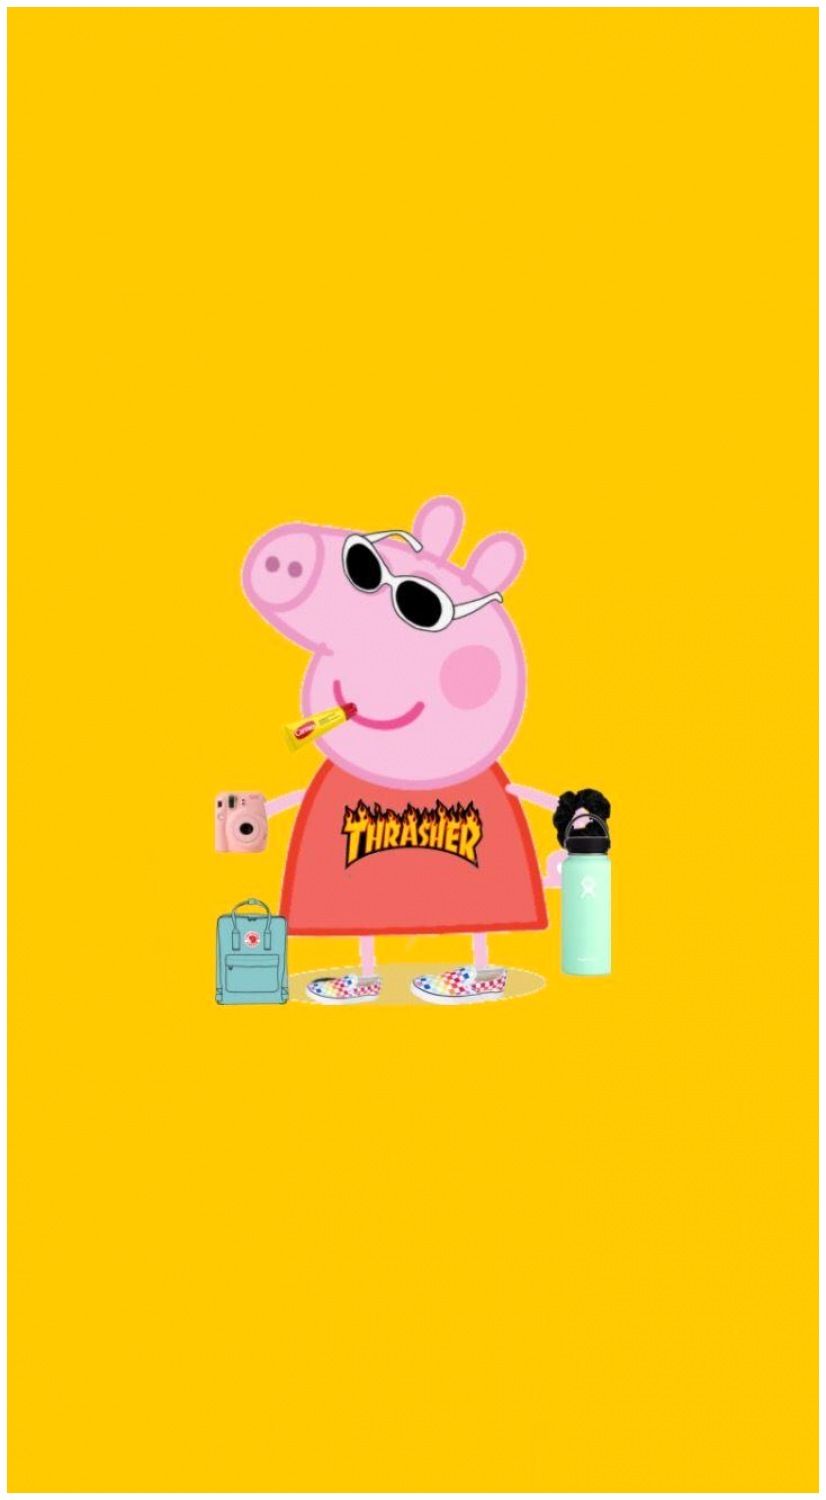 Pig Iphone Wallpapers